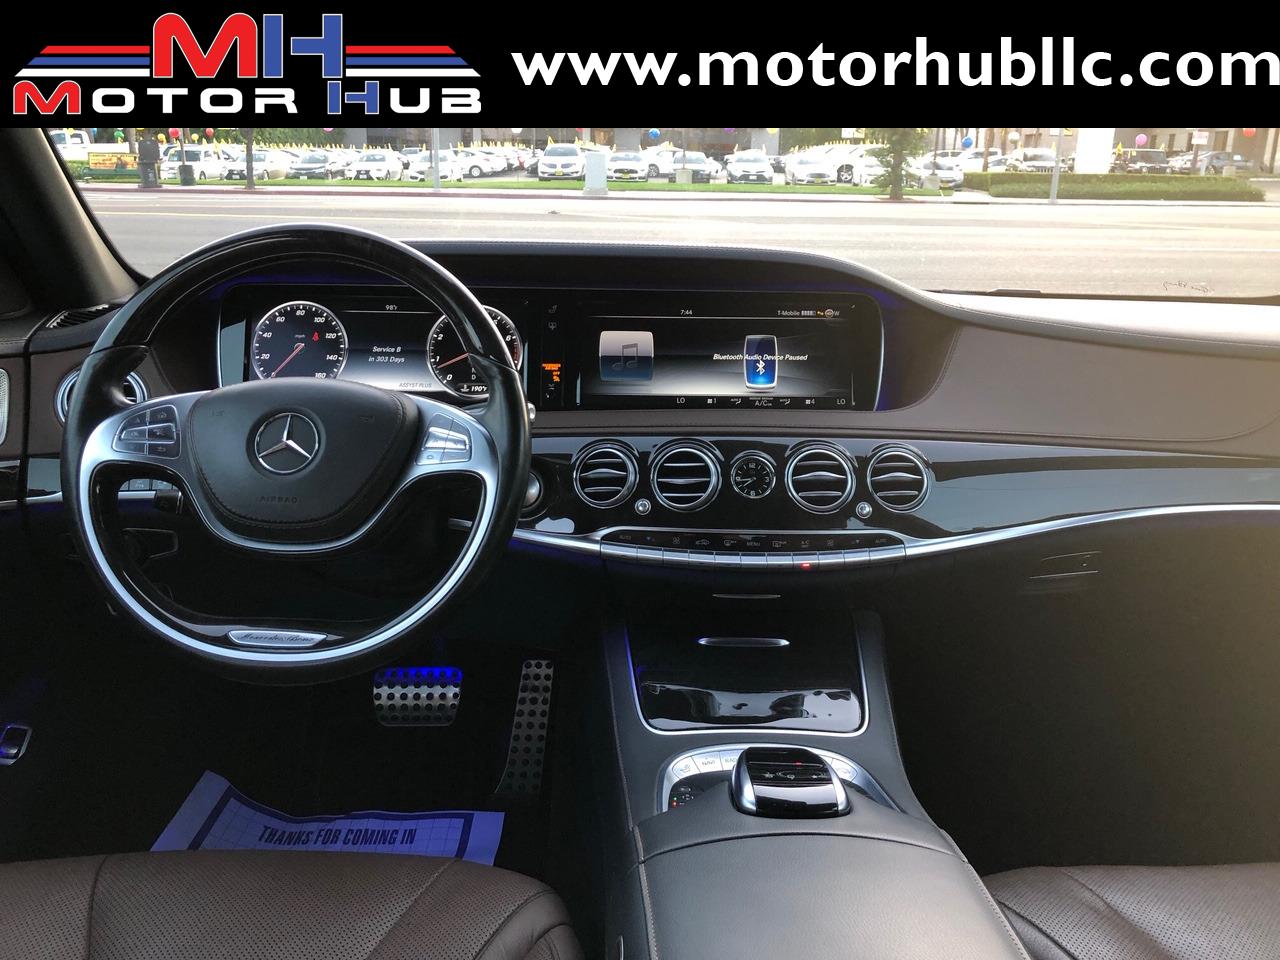 Used-2016-Mercedes-Benz-S-Class-S-550